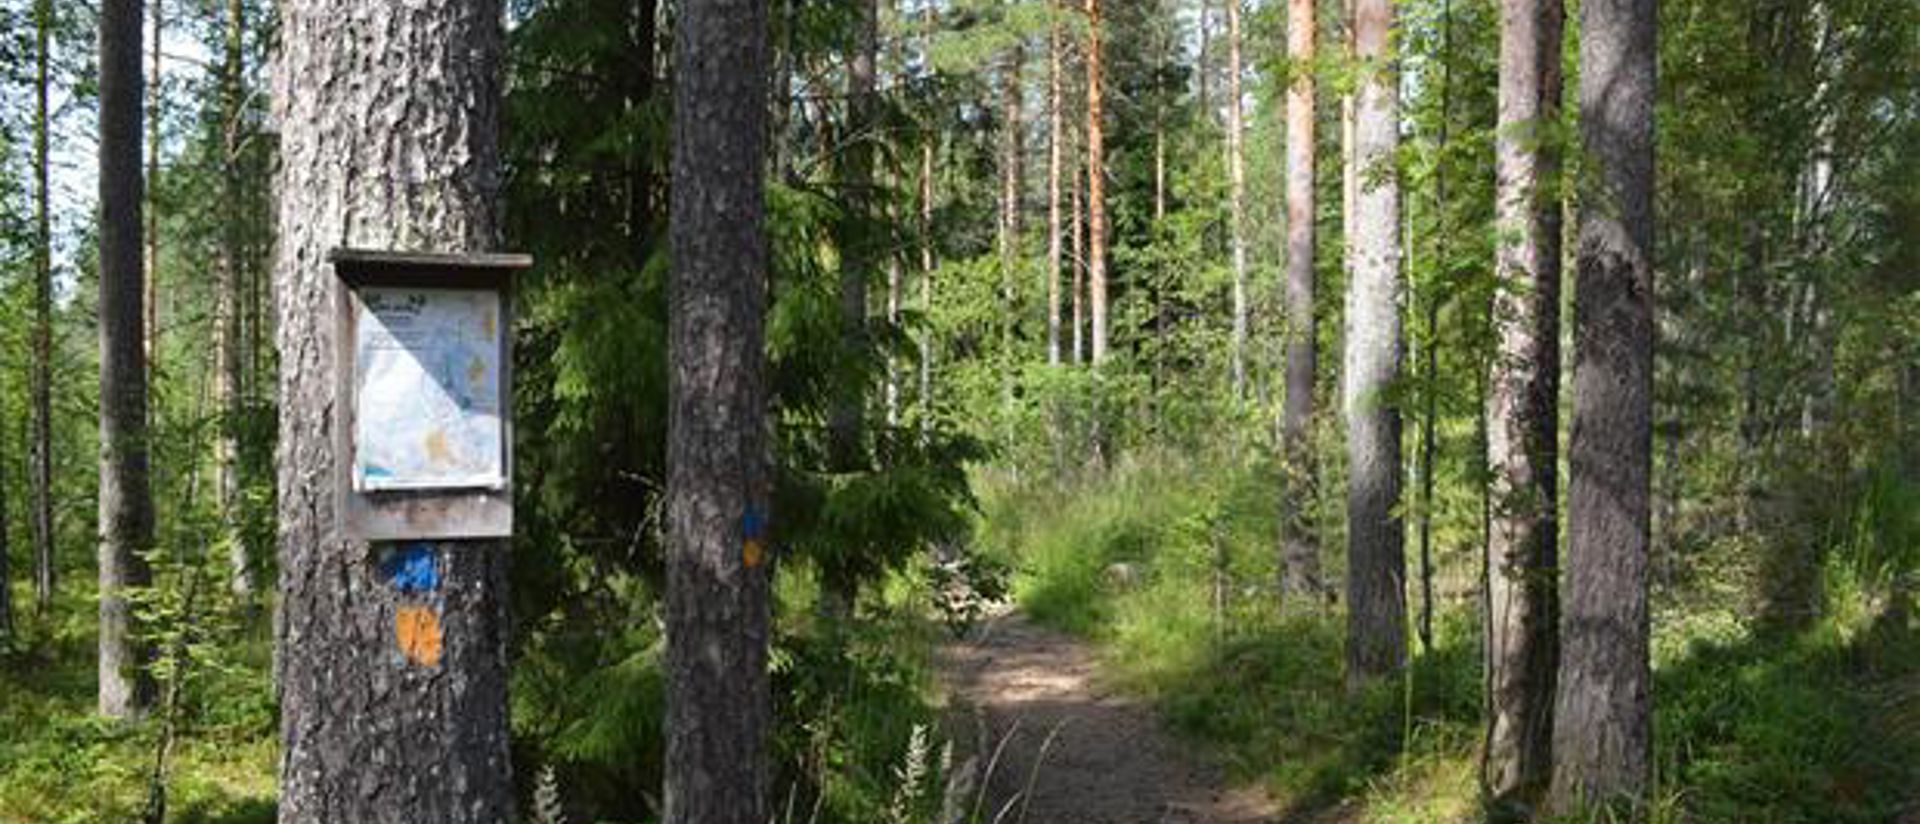 a fitness trail in a forest